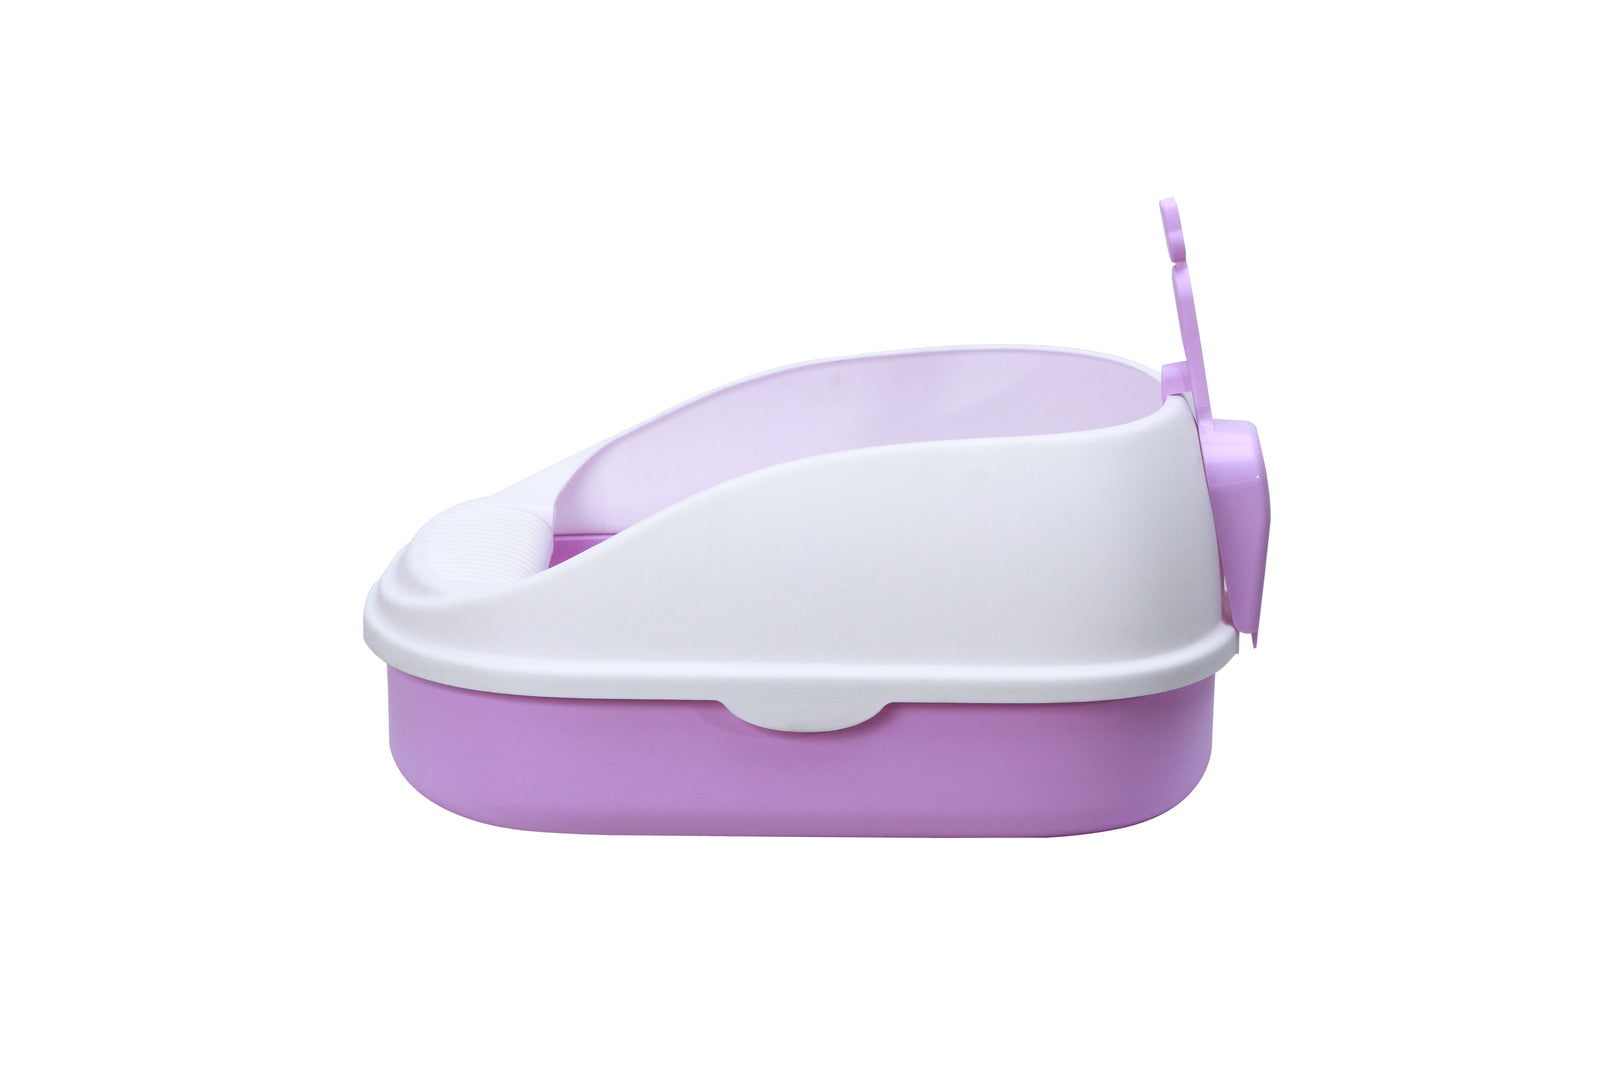 YES4PETS Medium Portable Cat Toilet Litter Box Tray with Scoop Purple